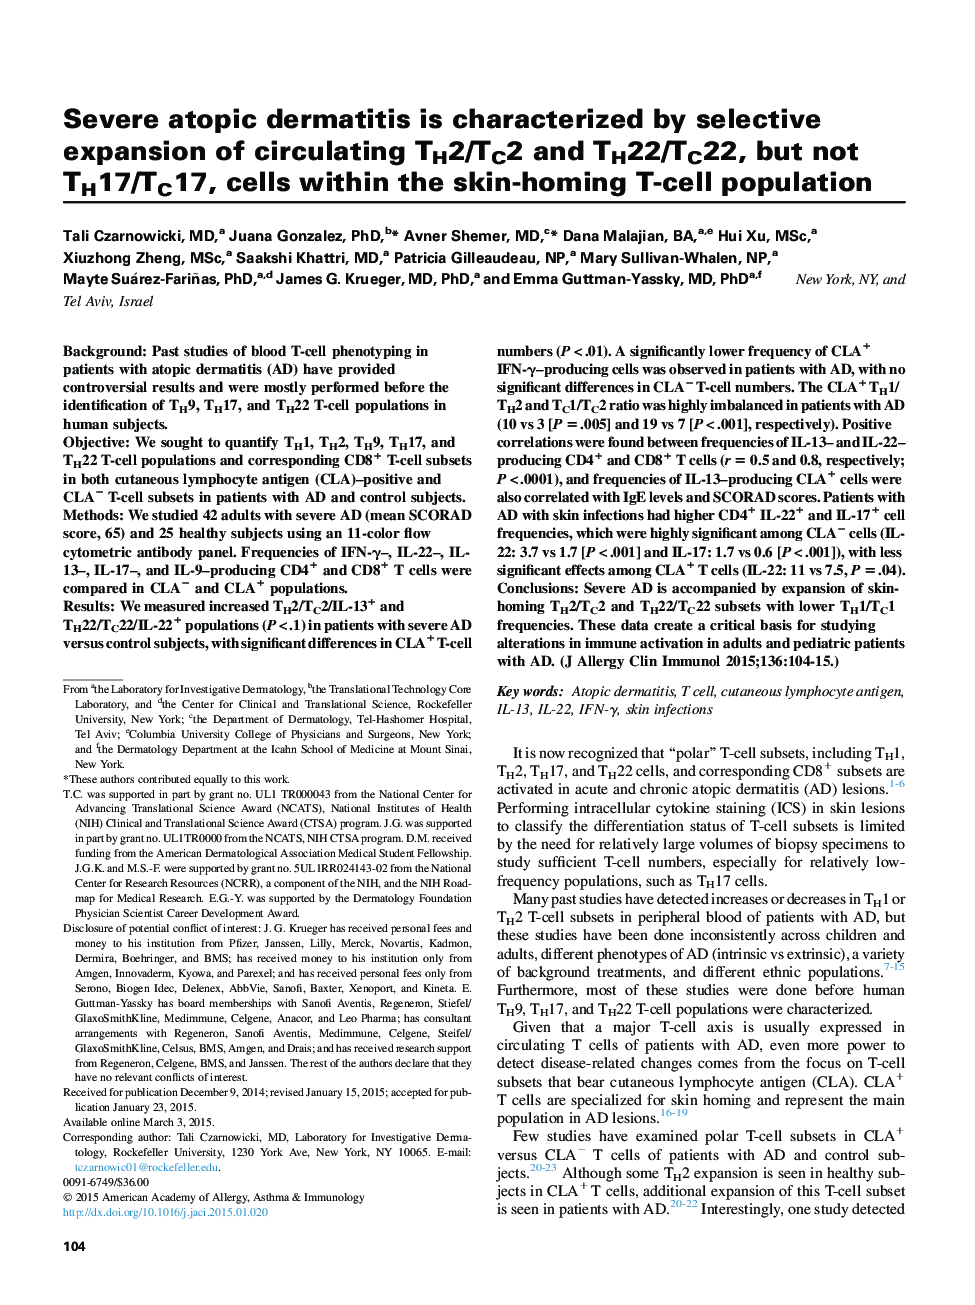 Atopic dermatitis and skin diseaseSevere atopic dermatitis is characterized by selective expansion of circulating TH2/TC2 and TH22/TC22, but not TH17/TC17, cells within the skin-homing T-cell population